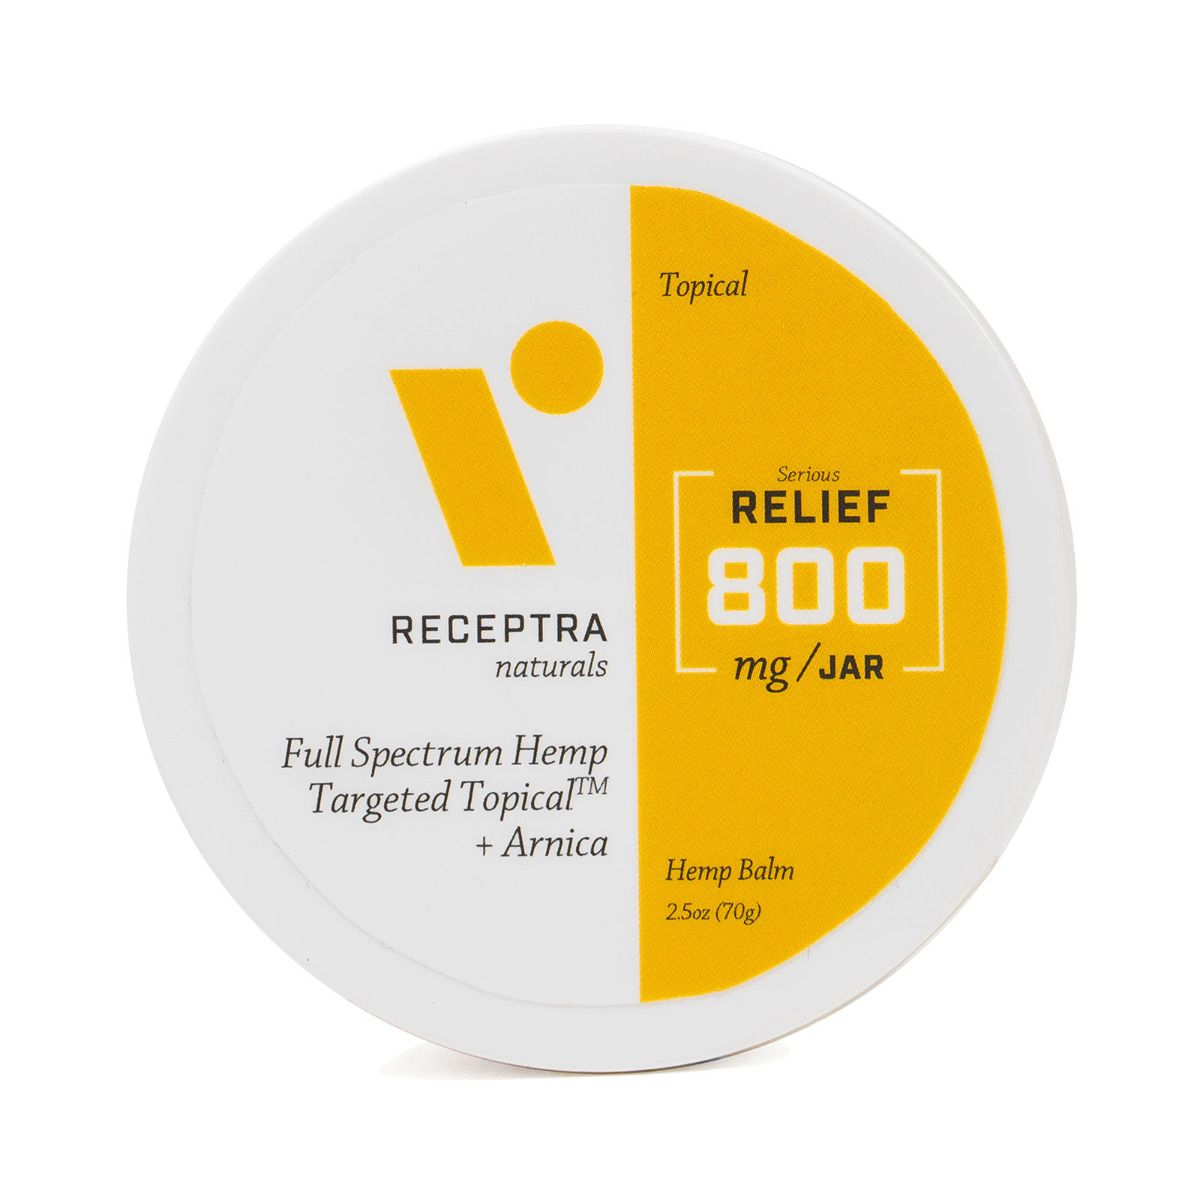 Serious Relief + Arnica Targeted Topical CBD Balm 800 mg 2.5 oz. (70 gm)